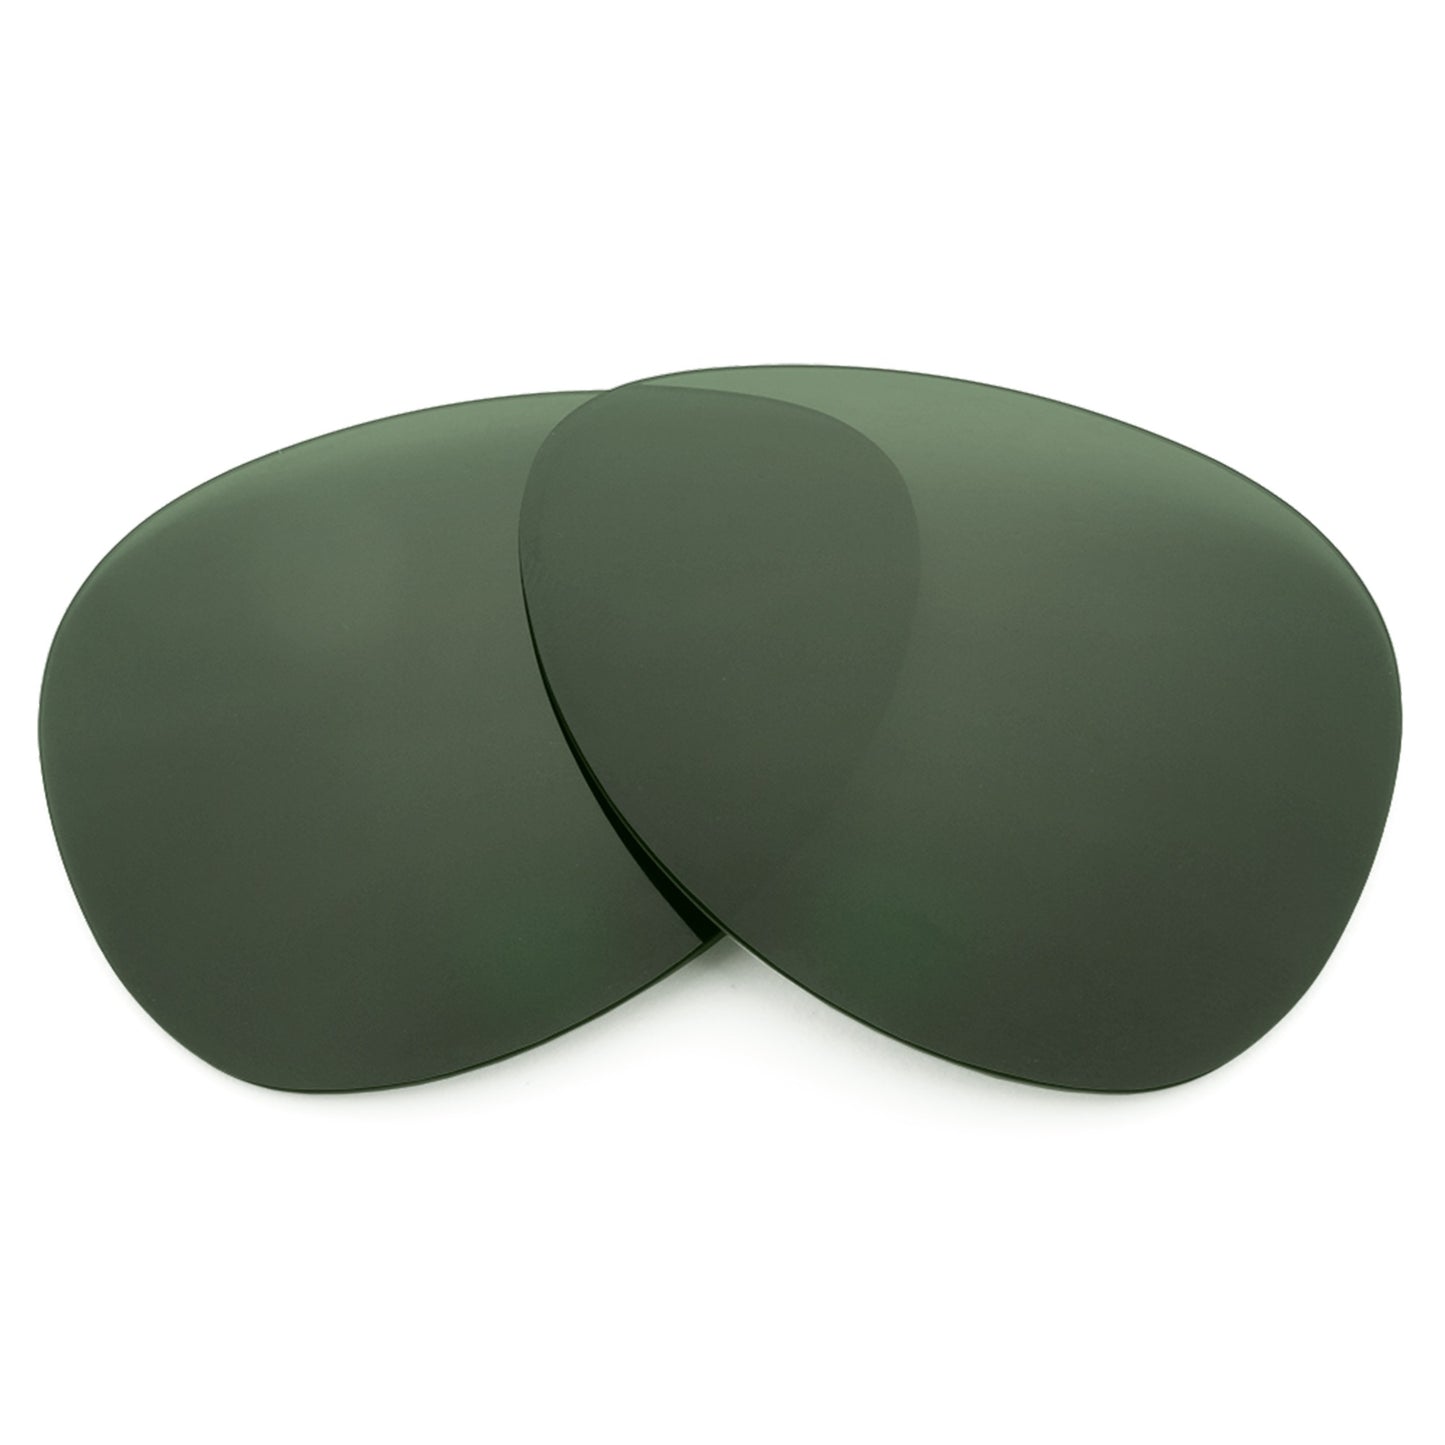 Revant replacement lenses for Ray-Ban RB4189 64mm Elite Polarized Gray Green